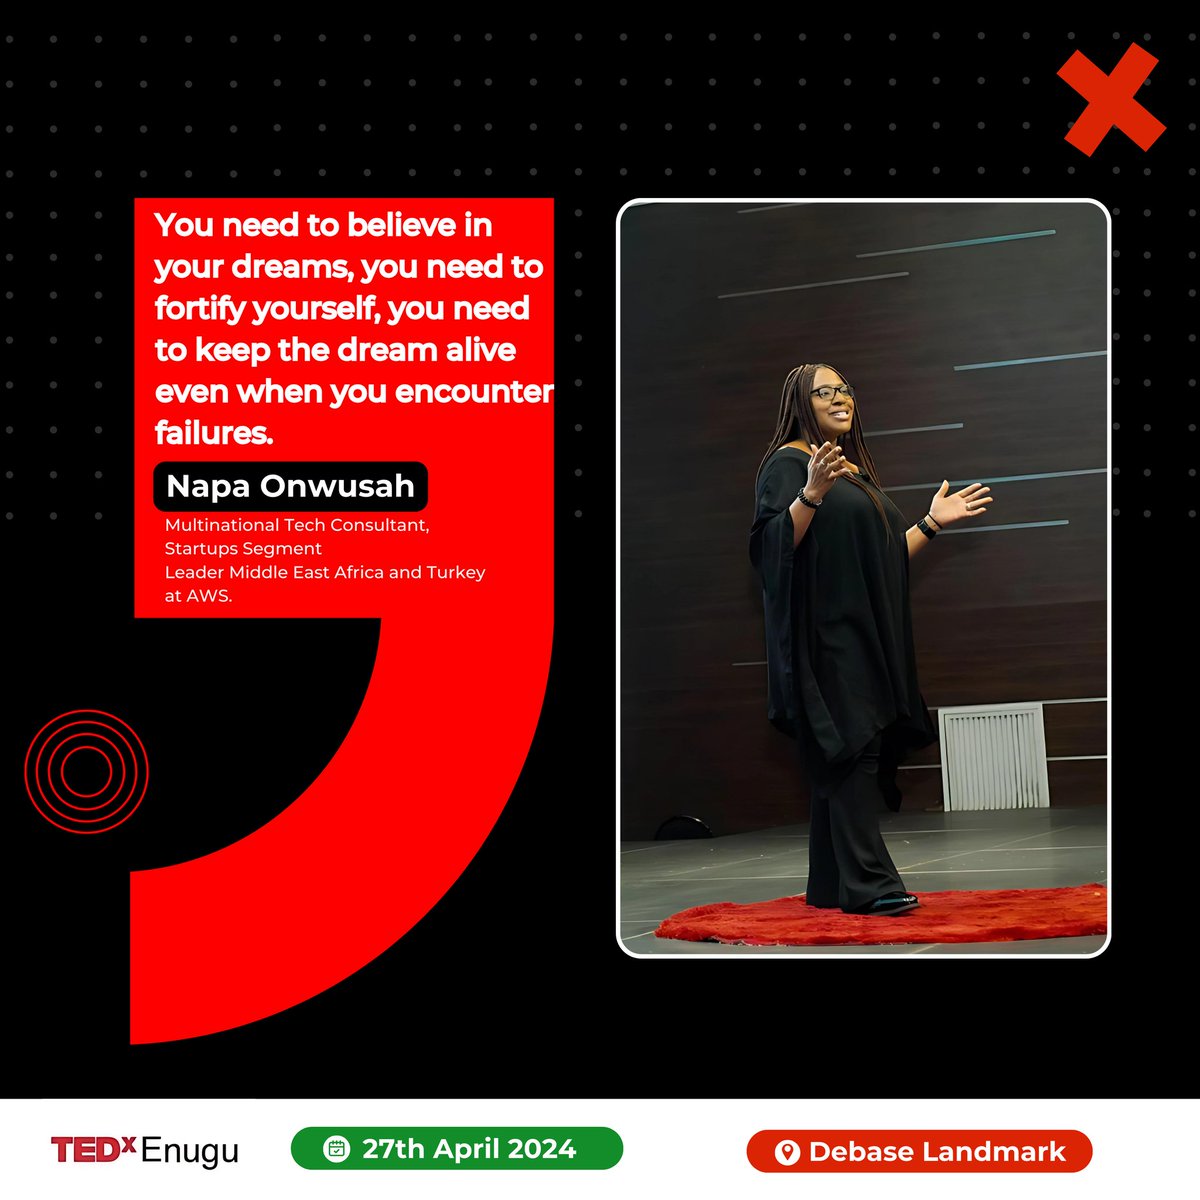 'You need to believe in your dreams, you need to fortify yourself, you need to keep the dream alive even when you encounter failures.' - Napa Onwusah Multinational Tech Consultant Startups Segment, Leader Middle East Africa and Turkey at AWS. #Tedx #Ted #TedxEnugu